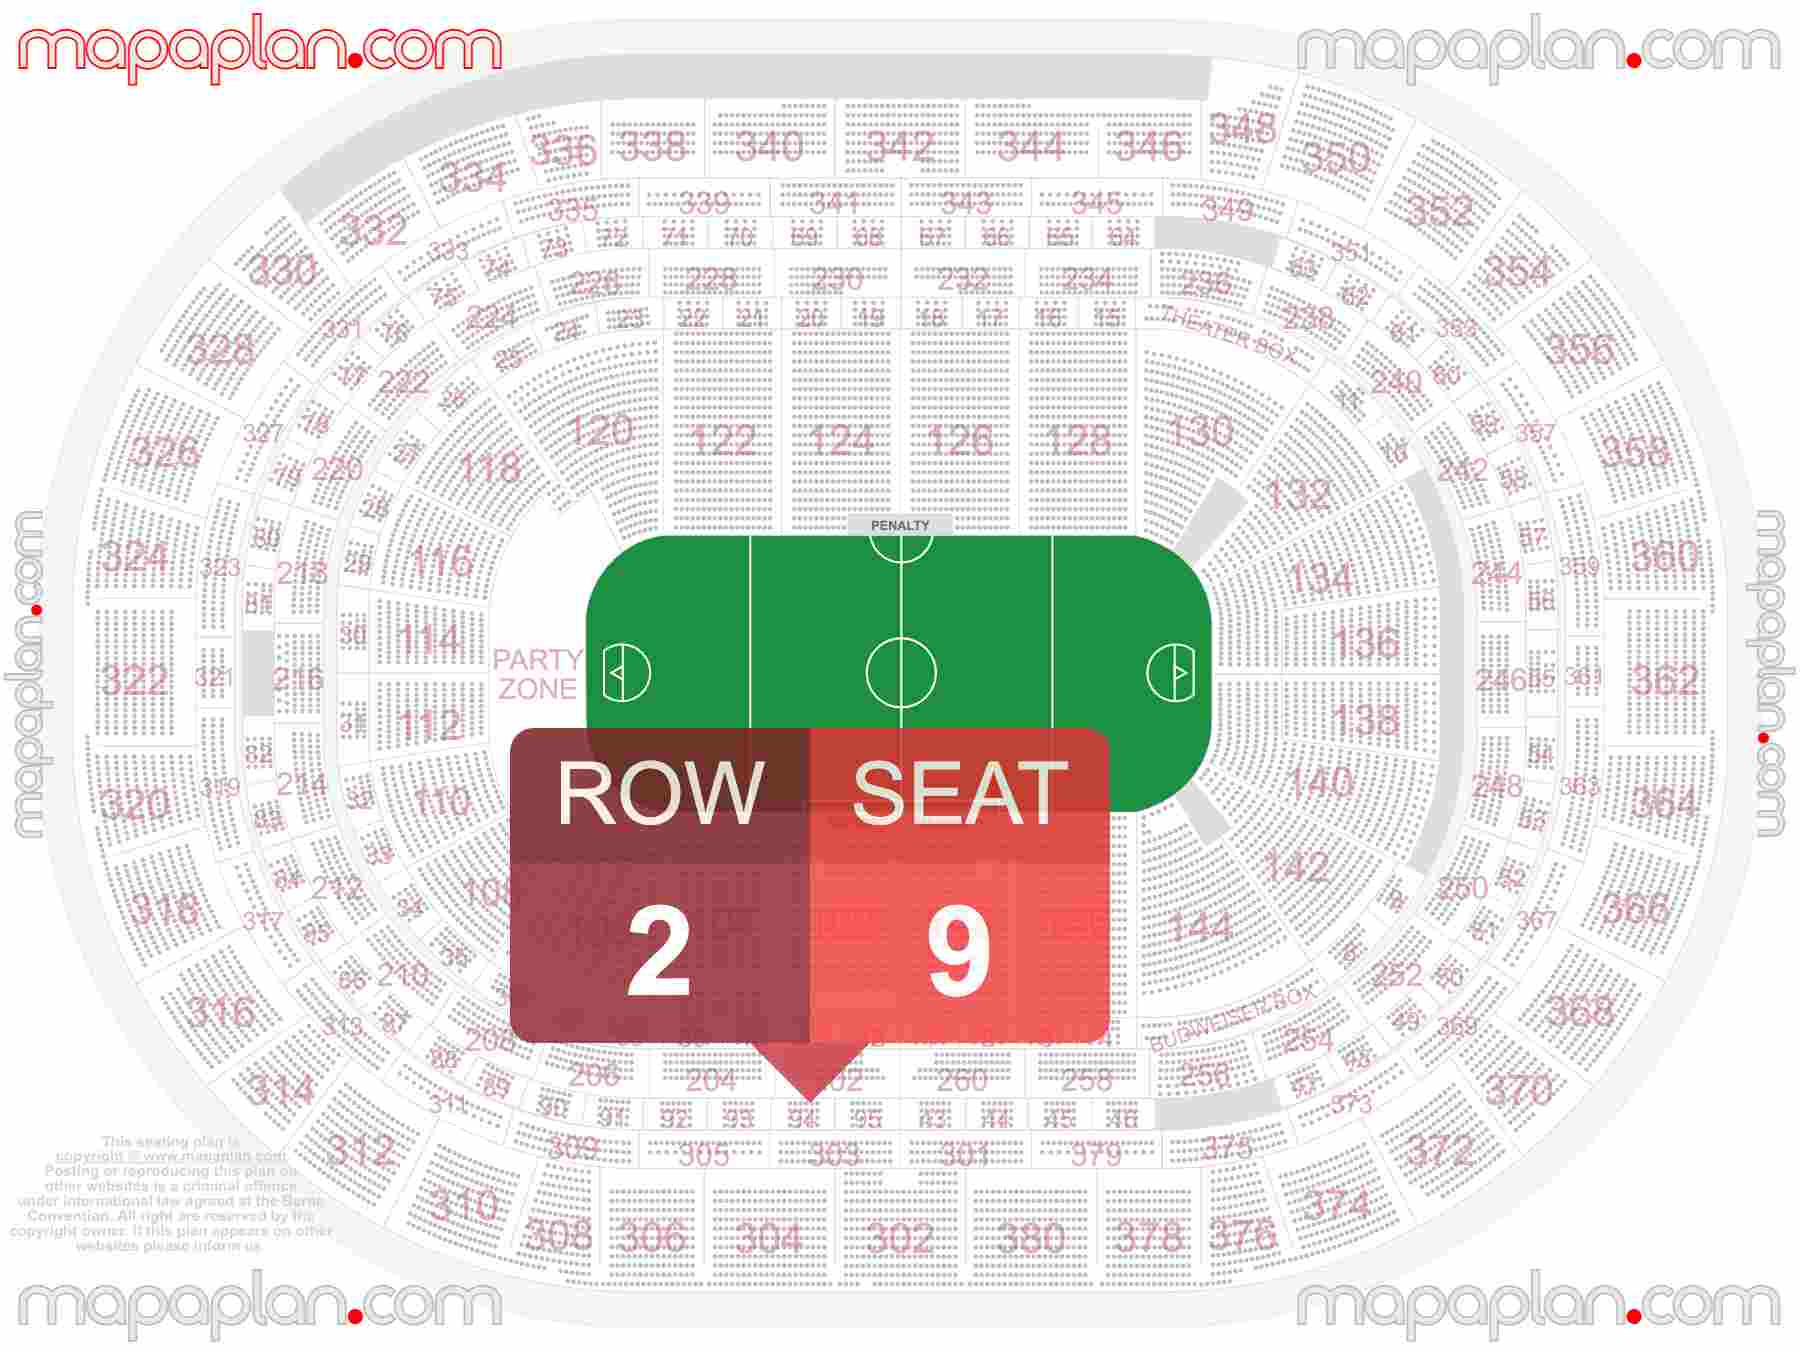 Denver Ball Arena seating chart Colorado Mammoth NLL lacrosse detailed seating chart - 3d virtual seat numbers and row layout